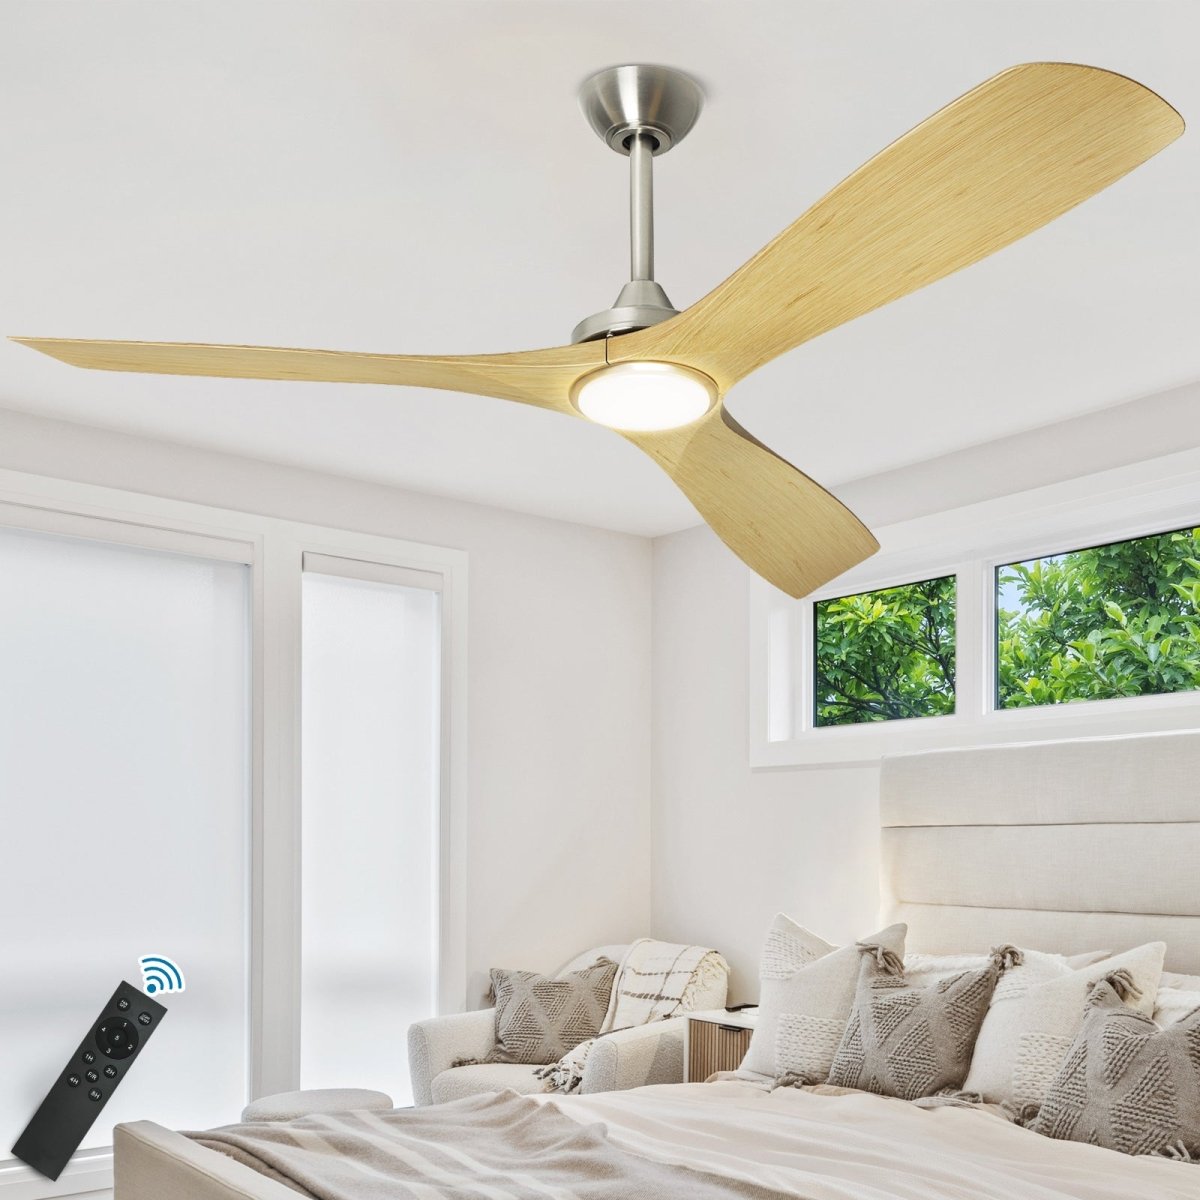 Depuley 52" Ceiling Fans with LED Lights and Remote, Modern Ceiling Fan Noiseless Reversible DC Motor for Kitchen/Patio/Farmhouse & Covered Outdoor Lighting, Timing, 3 Light Color Changeable - WS-FPZ40-18C-NE 1 | DEPULEY